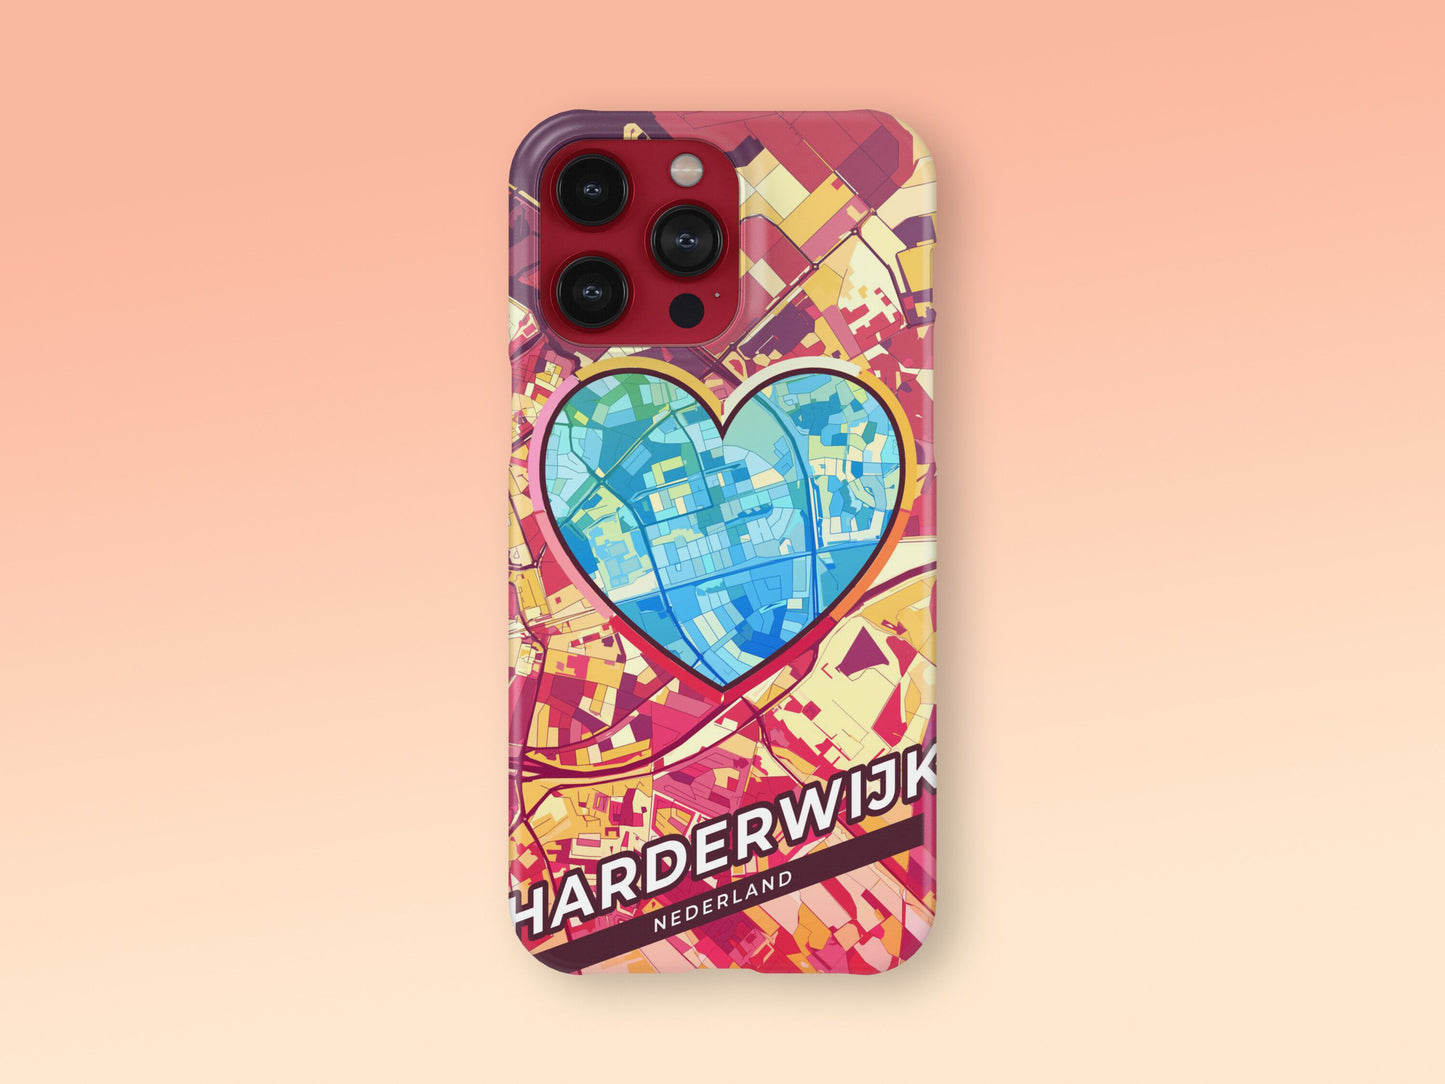 Harderwijk Netherlands slim phone case with colorful icon. Birthday, wedding or housewarming gift. Couple match cases. 2